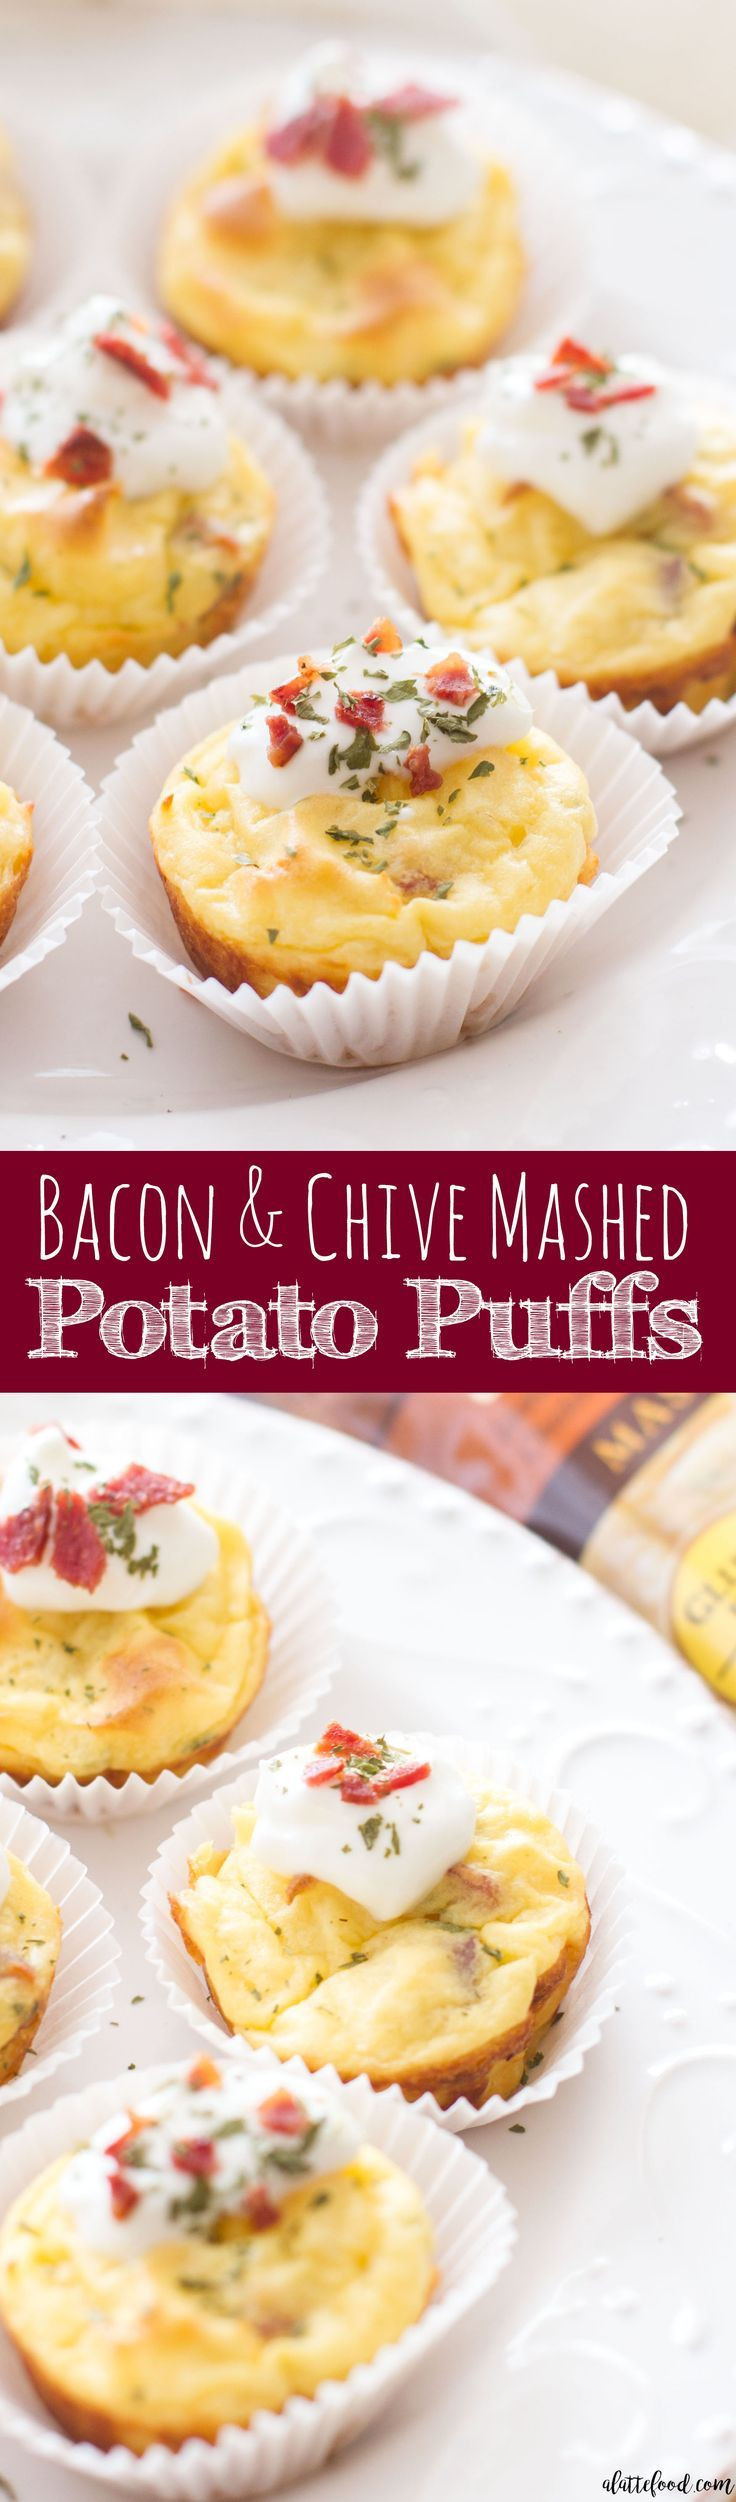 Mashed Potatoes Appetizers
 These easy bacon and chive mashed potato puffs are a